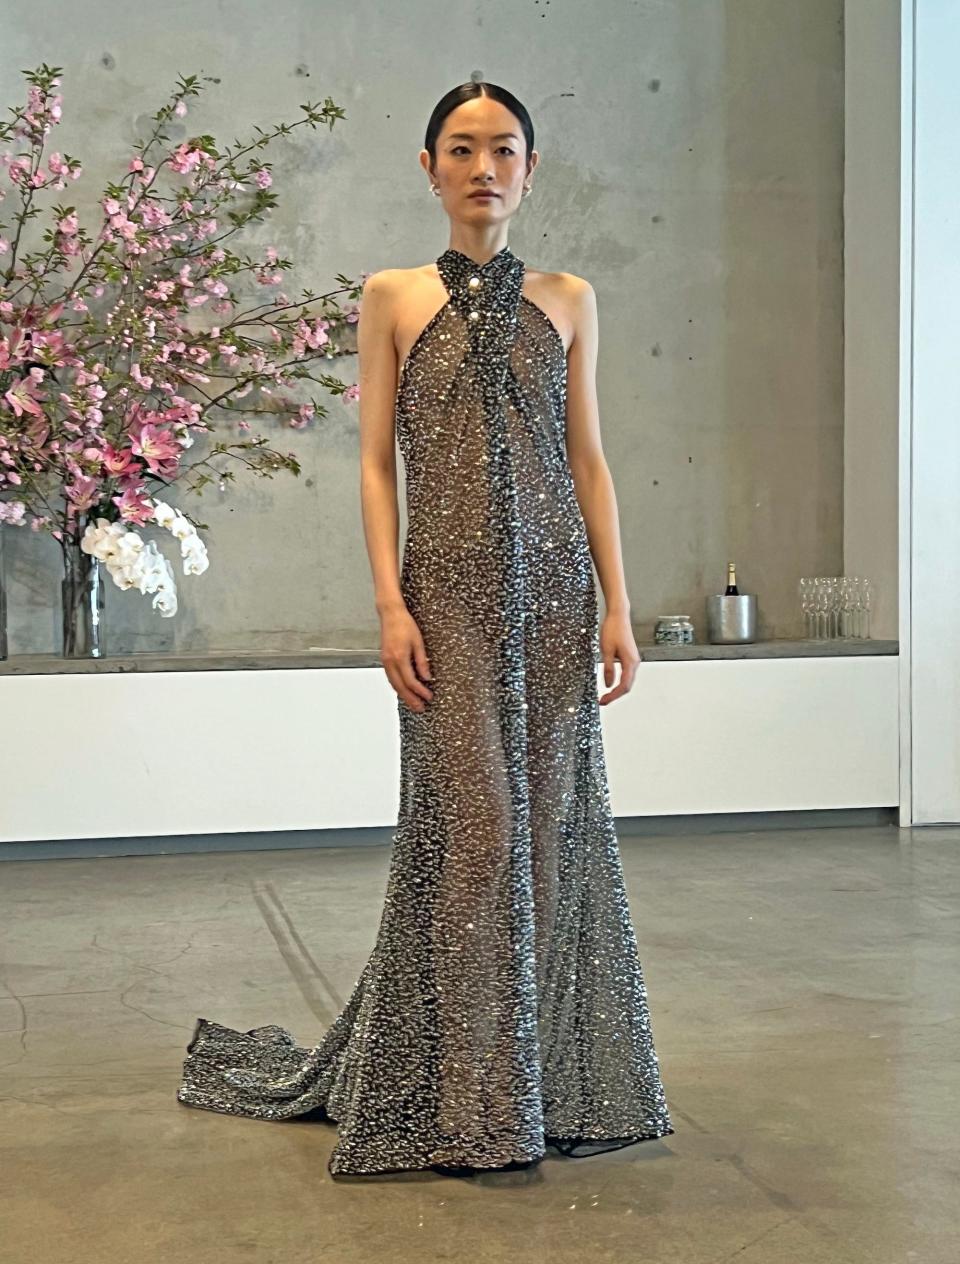 A woman poses in a sparkly, sheer dress.